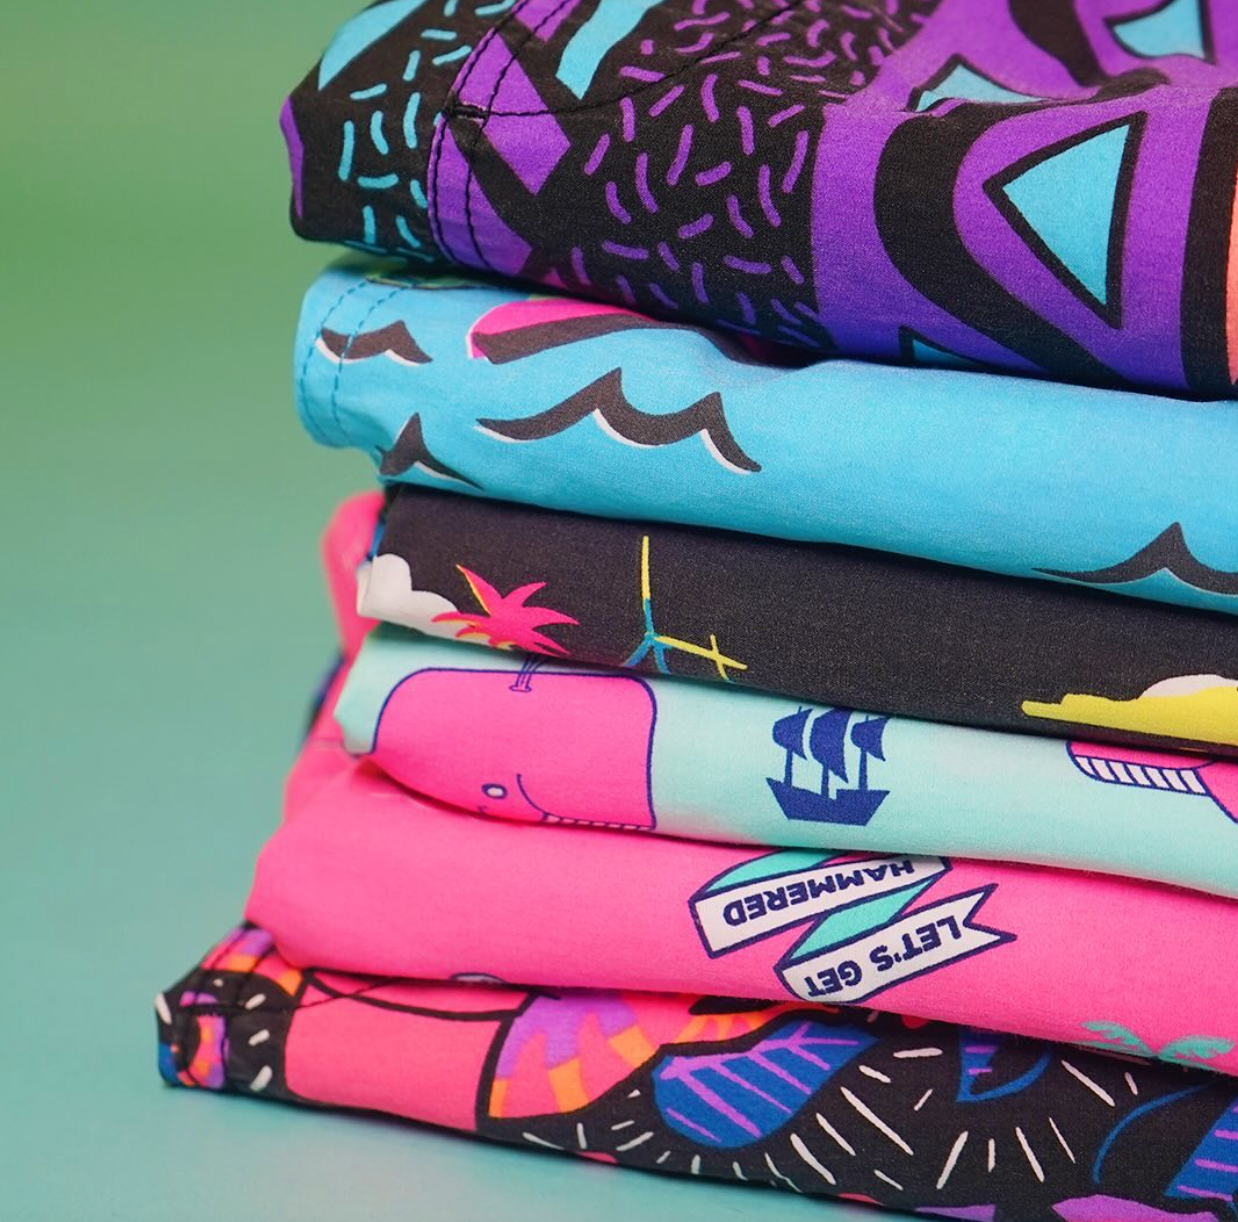 A stack of Party Pants hybrid swim shorts